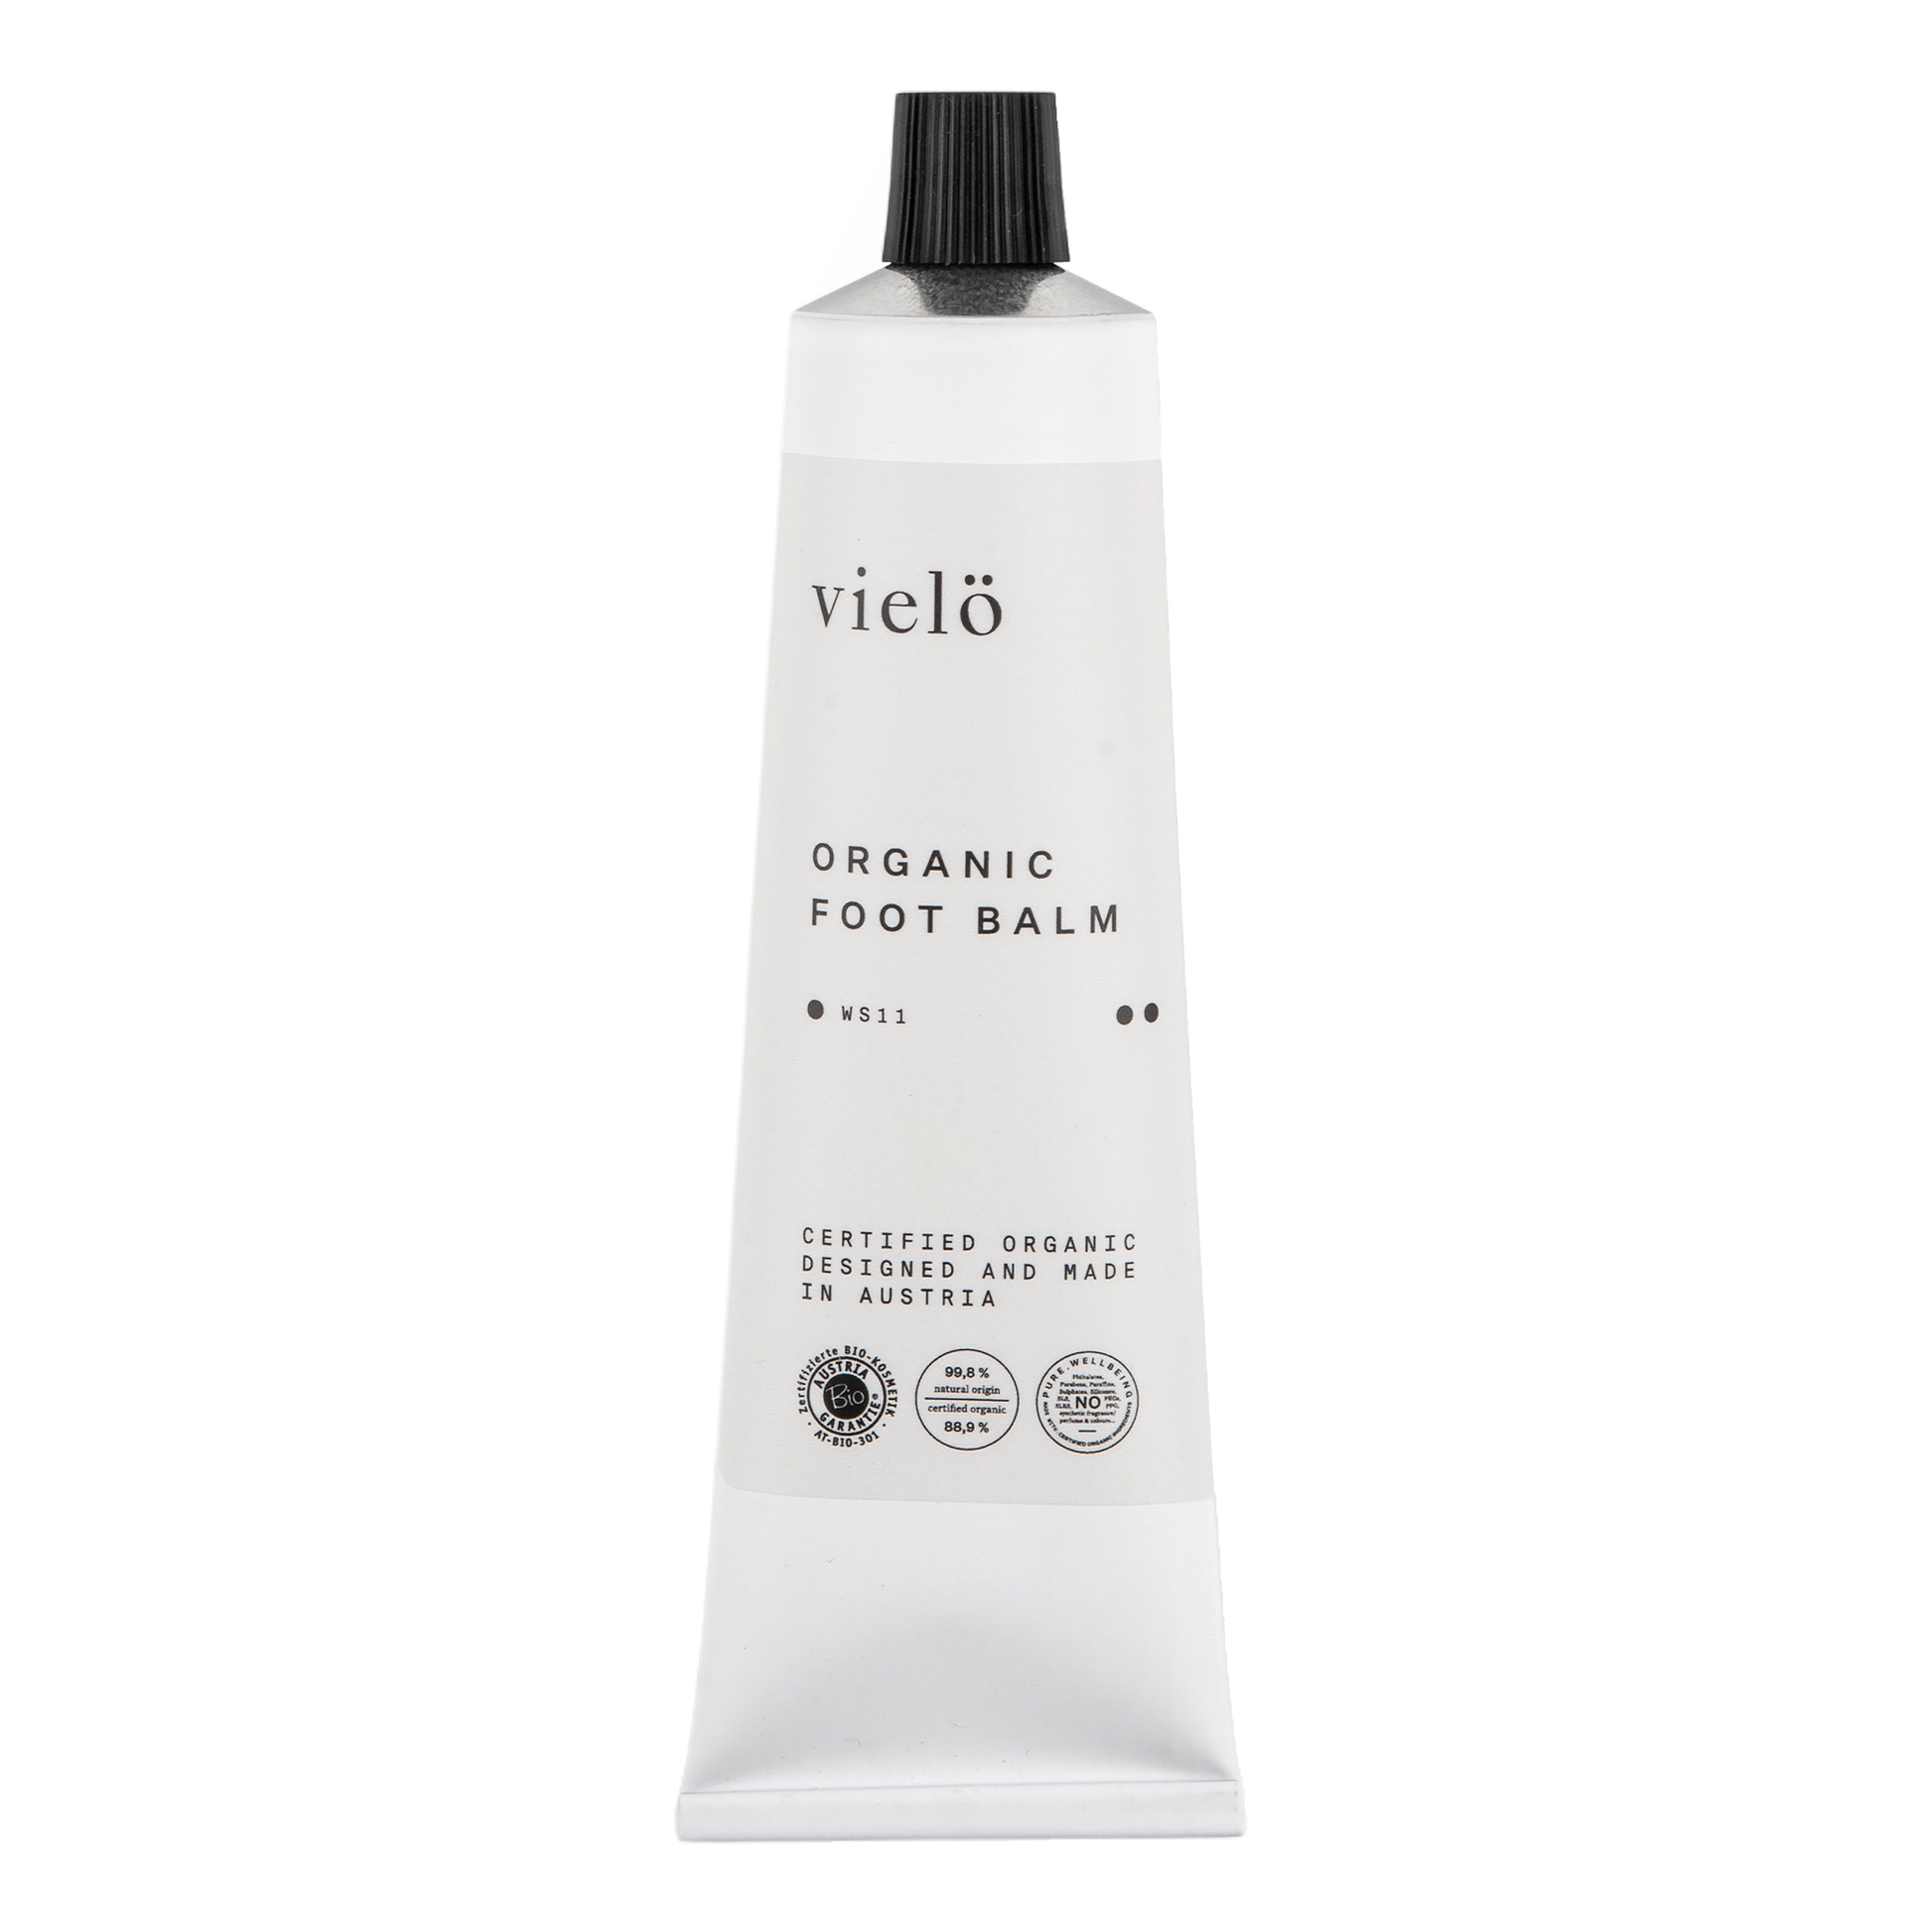 Vielo Organic Foot Balm: Nourishing organic foot balm, specially designed to moisturize and soften dry feet and cracked heels. Suitable for all skin types.